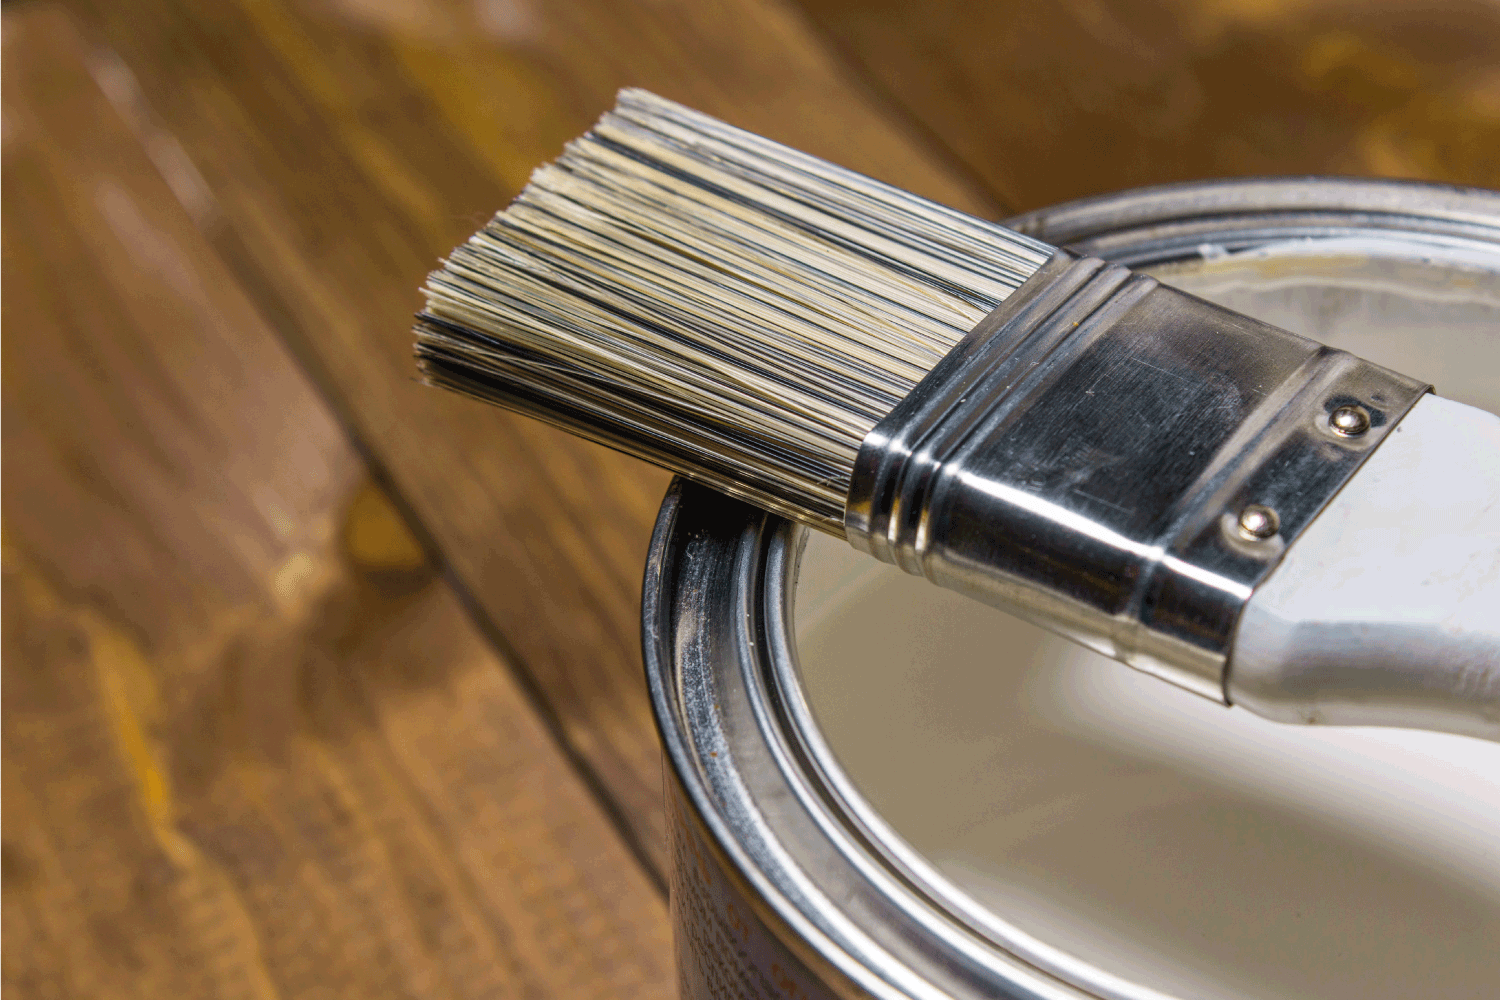 Paint brush on a tin can with white paint close-up, against a background of a wooden texture of a table